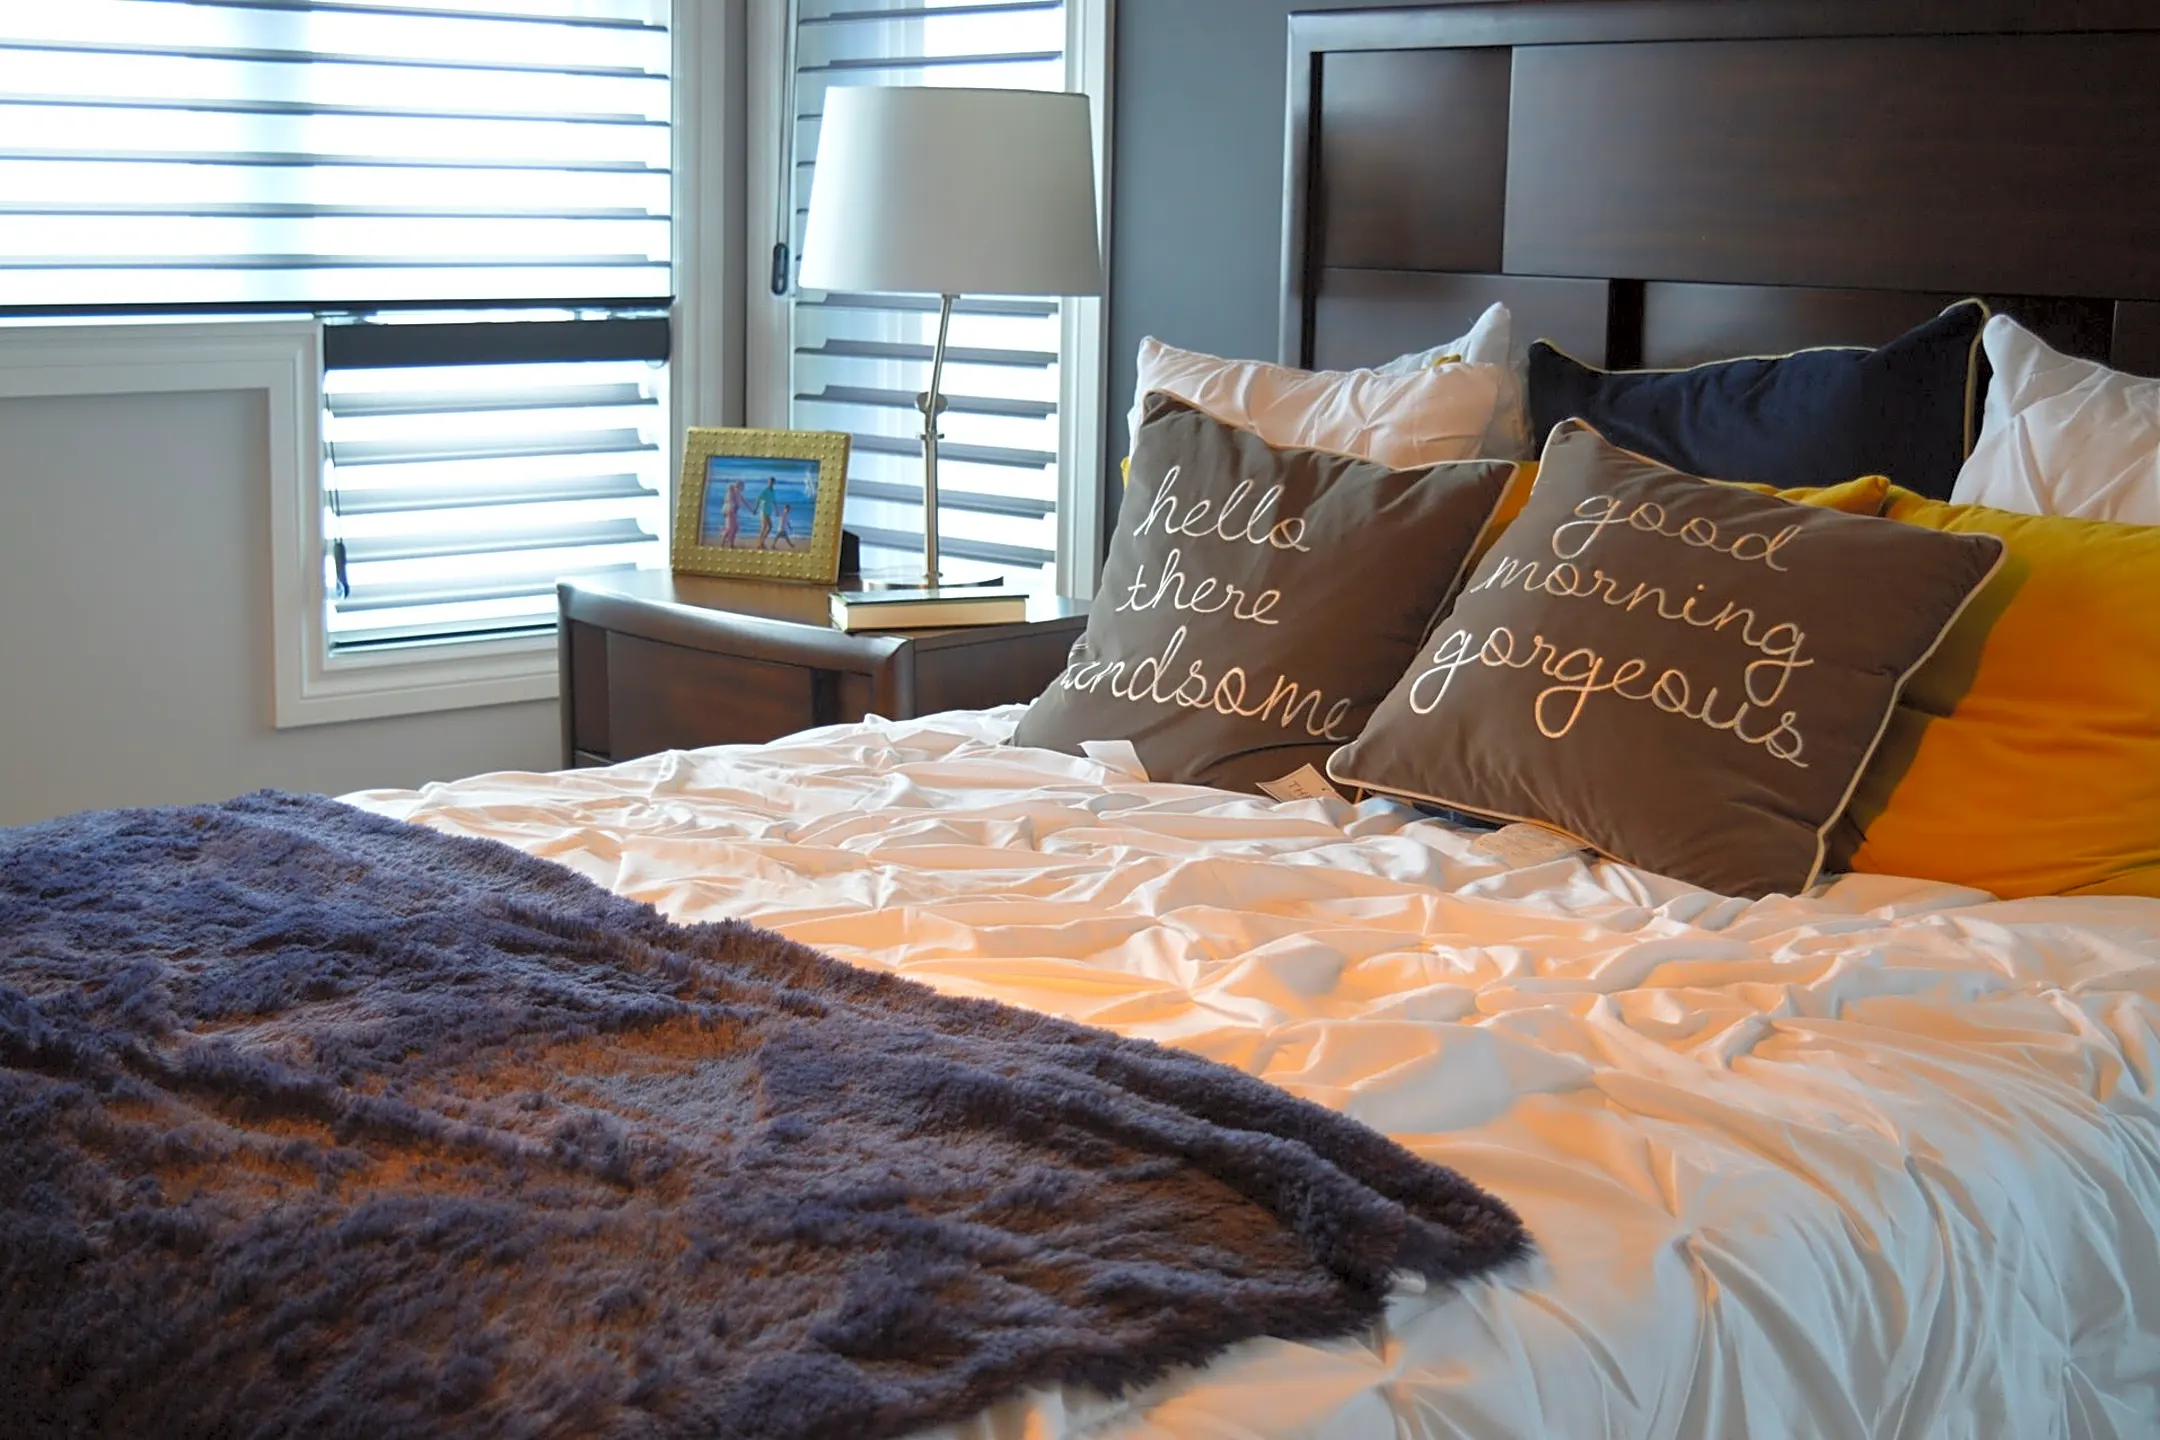 Bedroom - The Pointe at Crestmont - Houston, TX